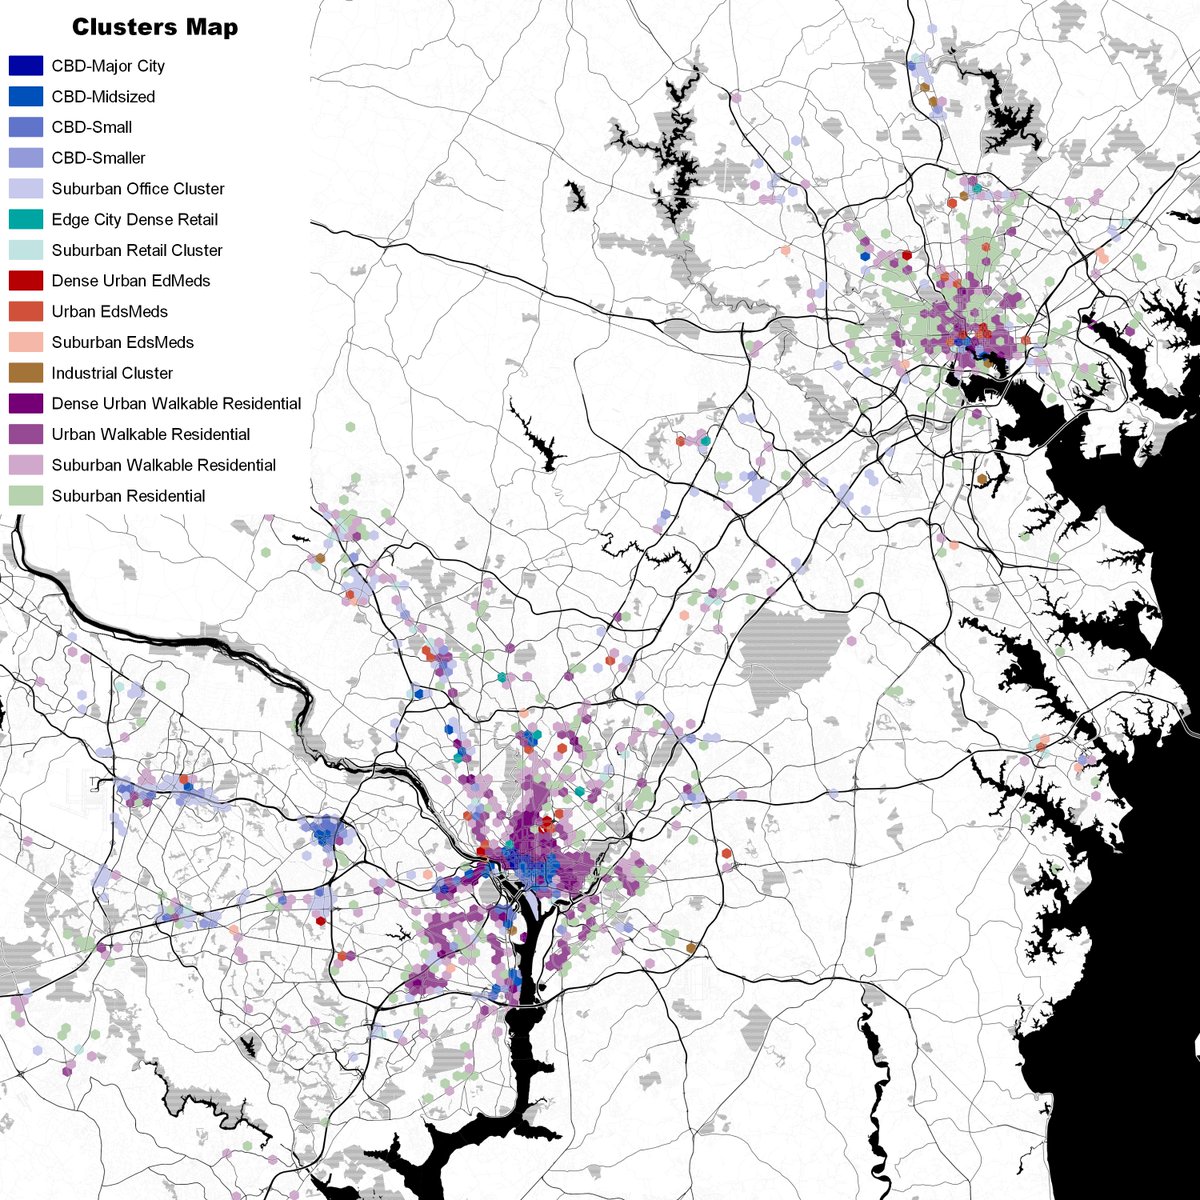 And here we have Baltimore-Washington. It's notable how much of West Baltimore is relatively dense but not walkable due to no retail...can anyone say "food apartheid"? Also, I was impressed by how visible Columbia Pike in VA is: I really need to walk it someday.